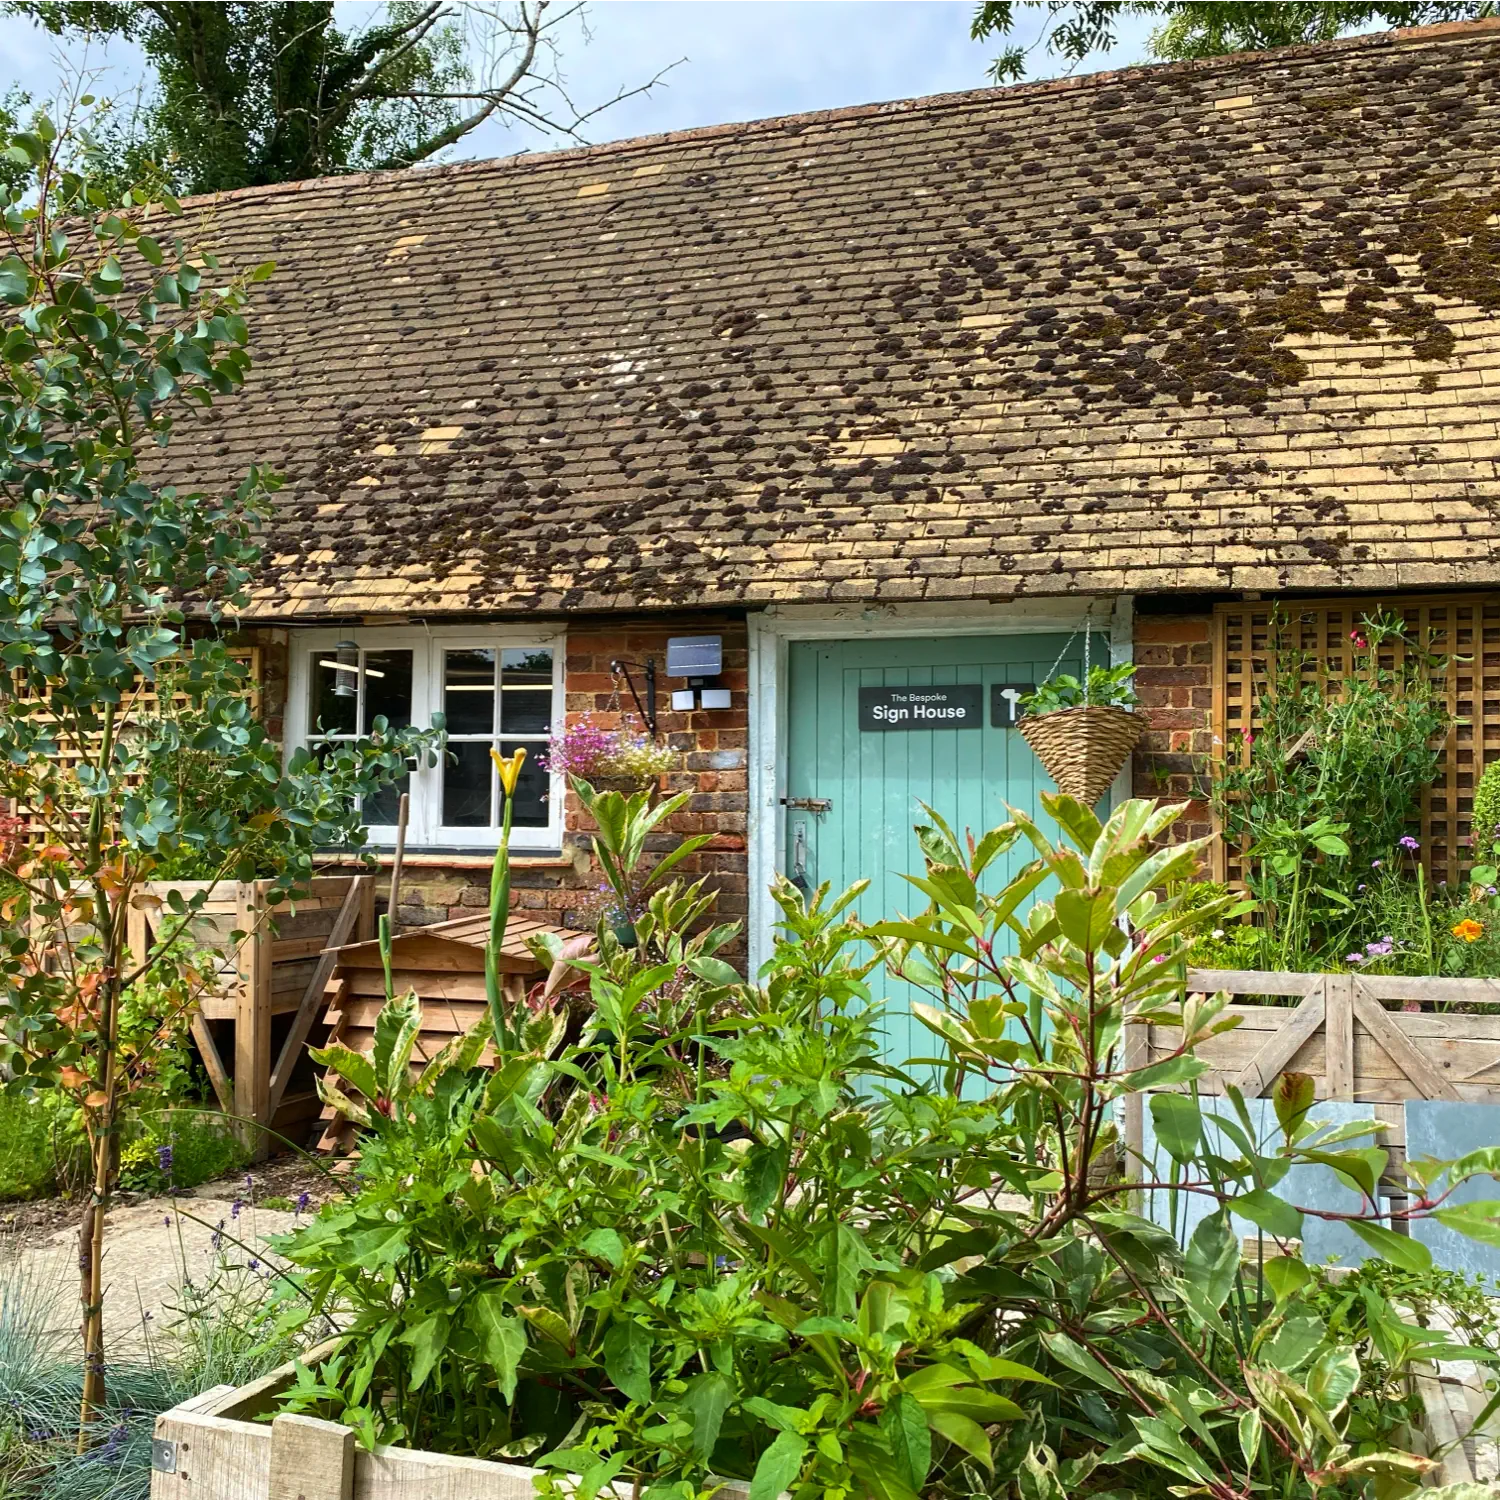 The workshop in Rolvenden where Wooden Maps Co and The Bespoke Sign House are based